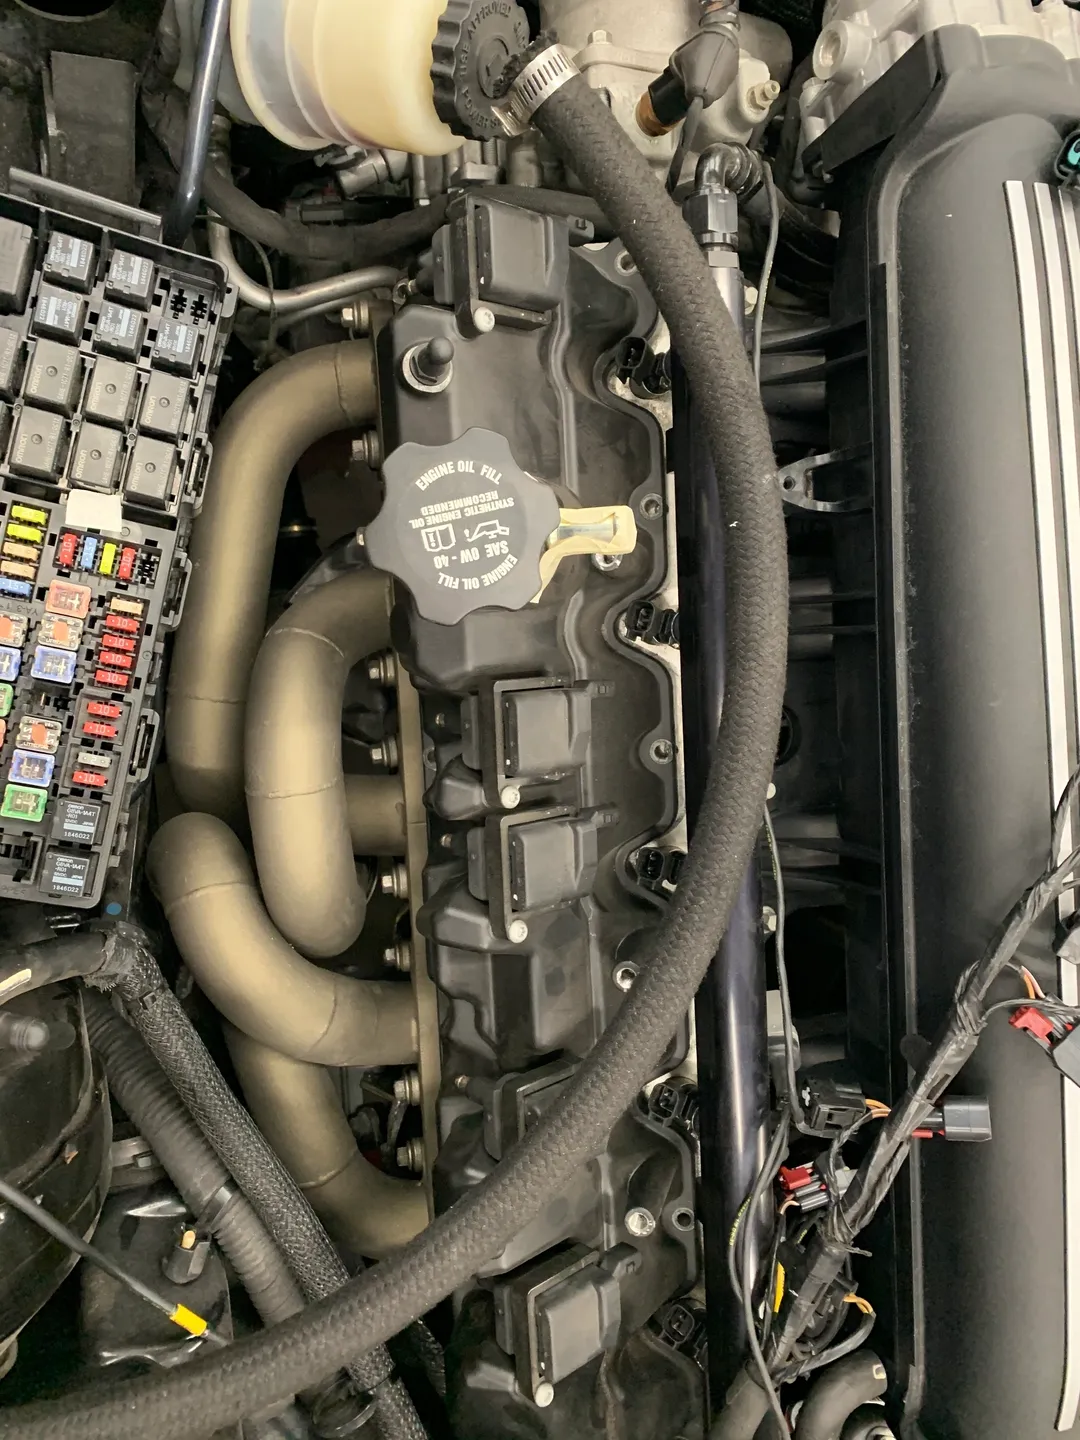 The cover of a car engine in the hood